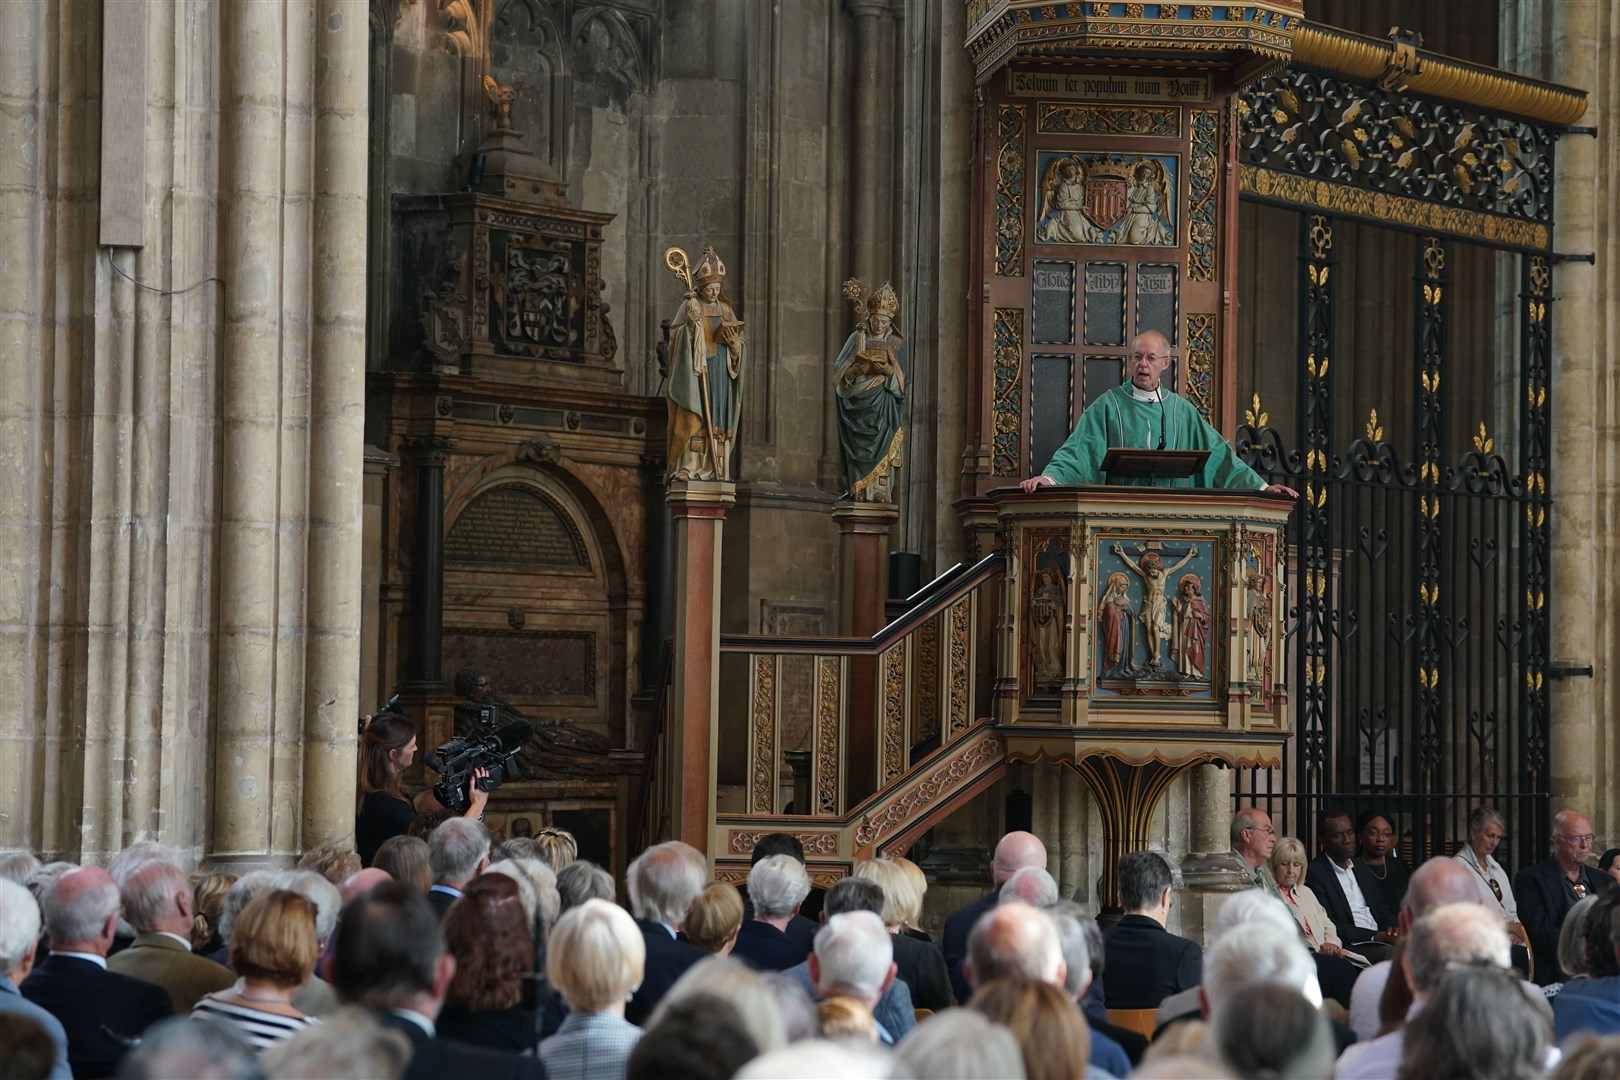 The Archbishop of Canterbury delivers a sermon at a special service at Canterbury Cathedral on Sunday (Gareth Fuller/PA)